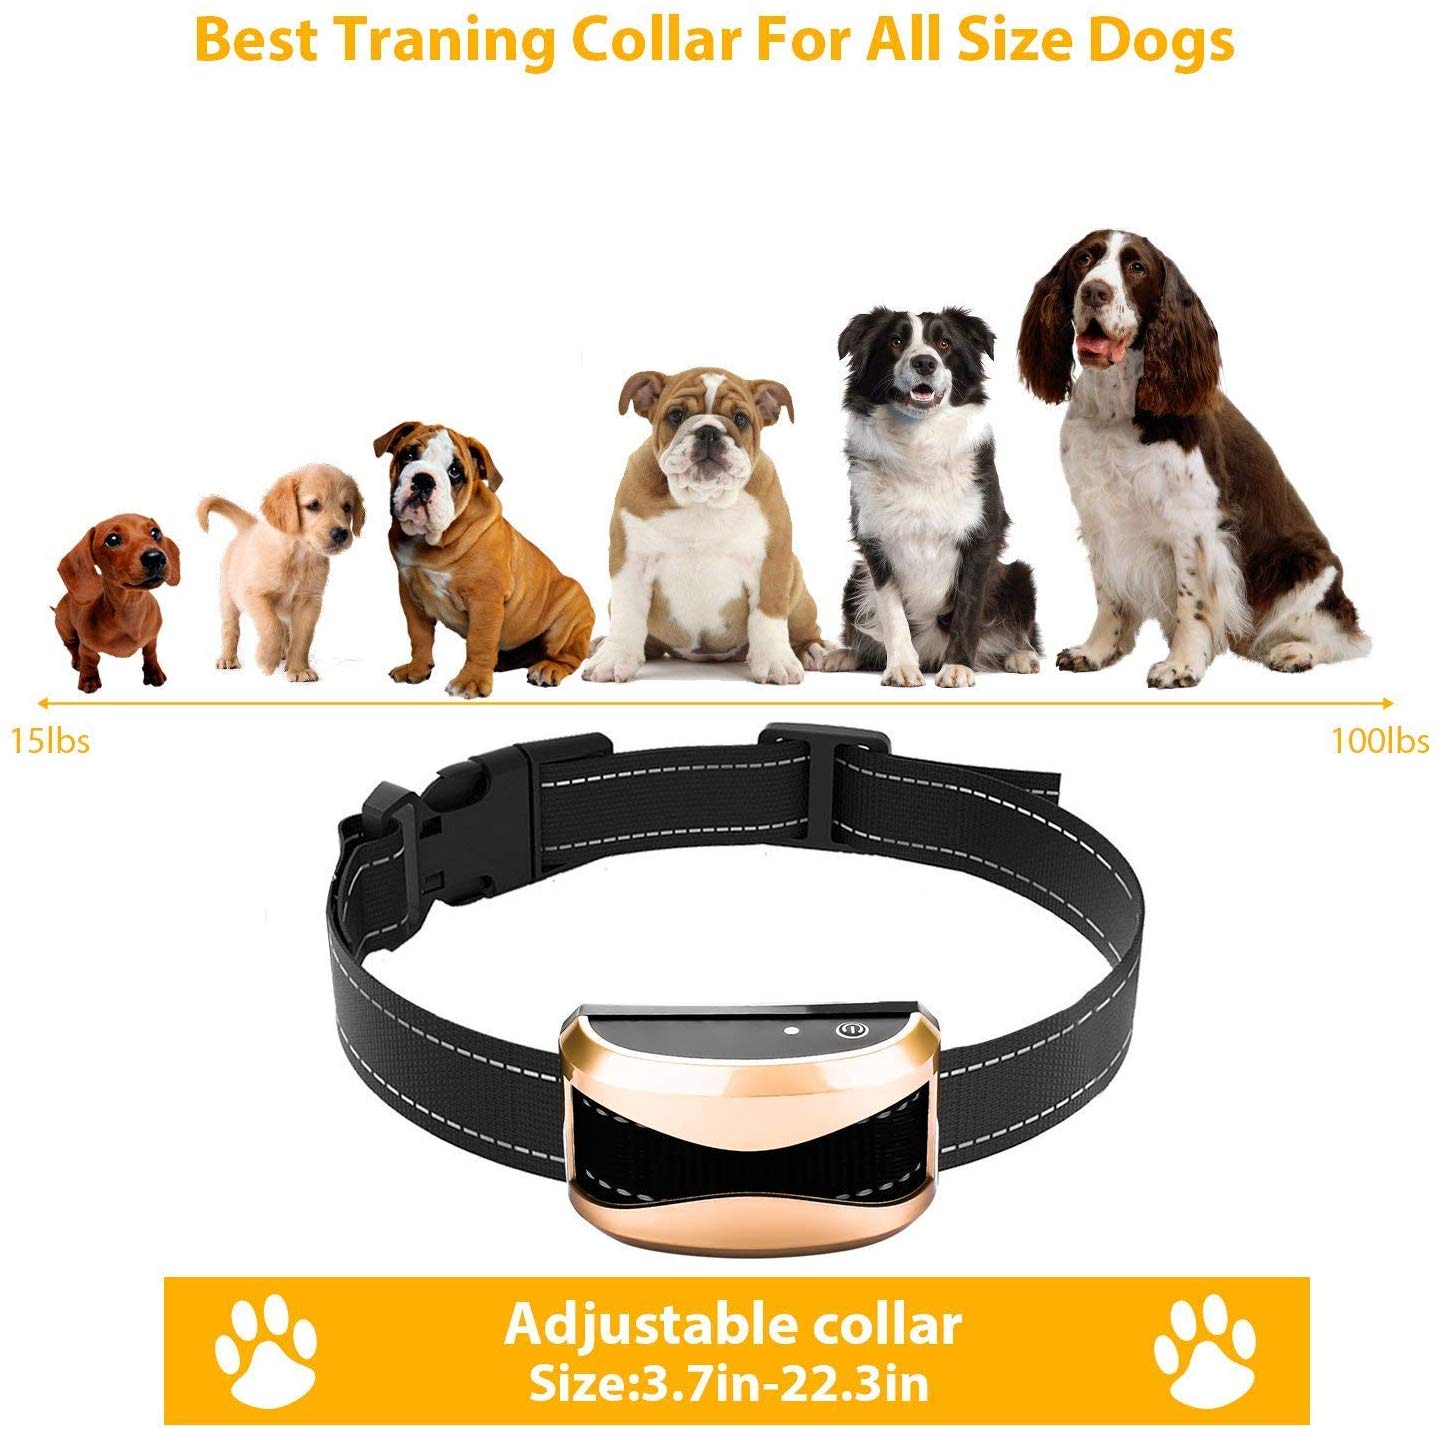 800 Yards Dog Training Collar - Waterproof & Rechargeable E-Collar with Beep Automation Adjustable Vibration (1*collar)